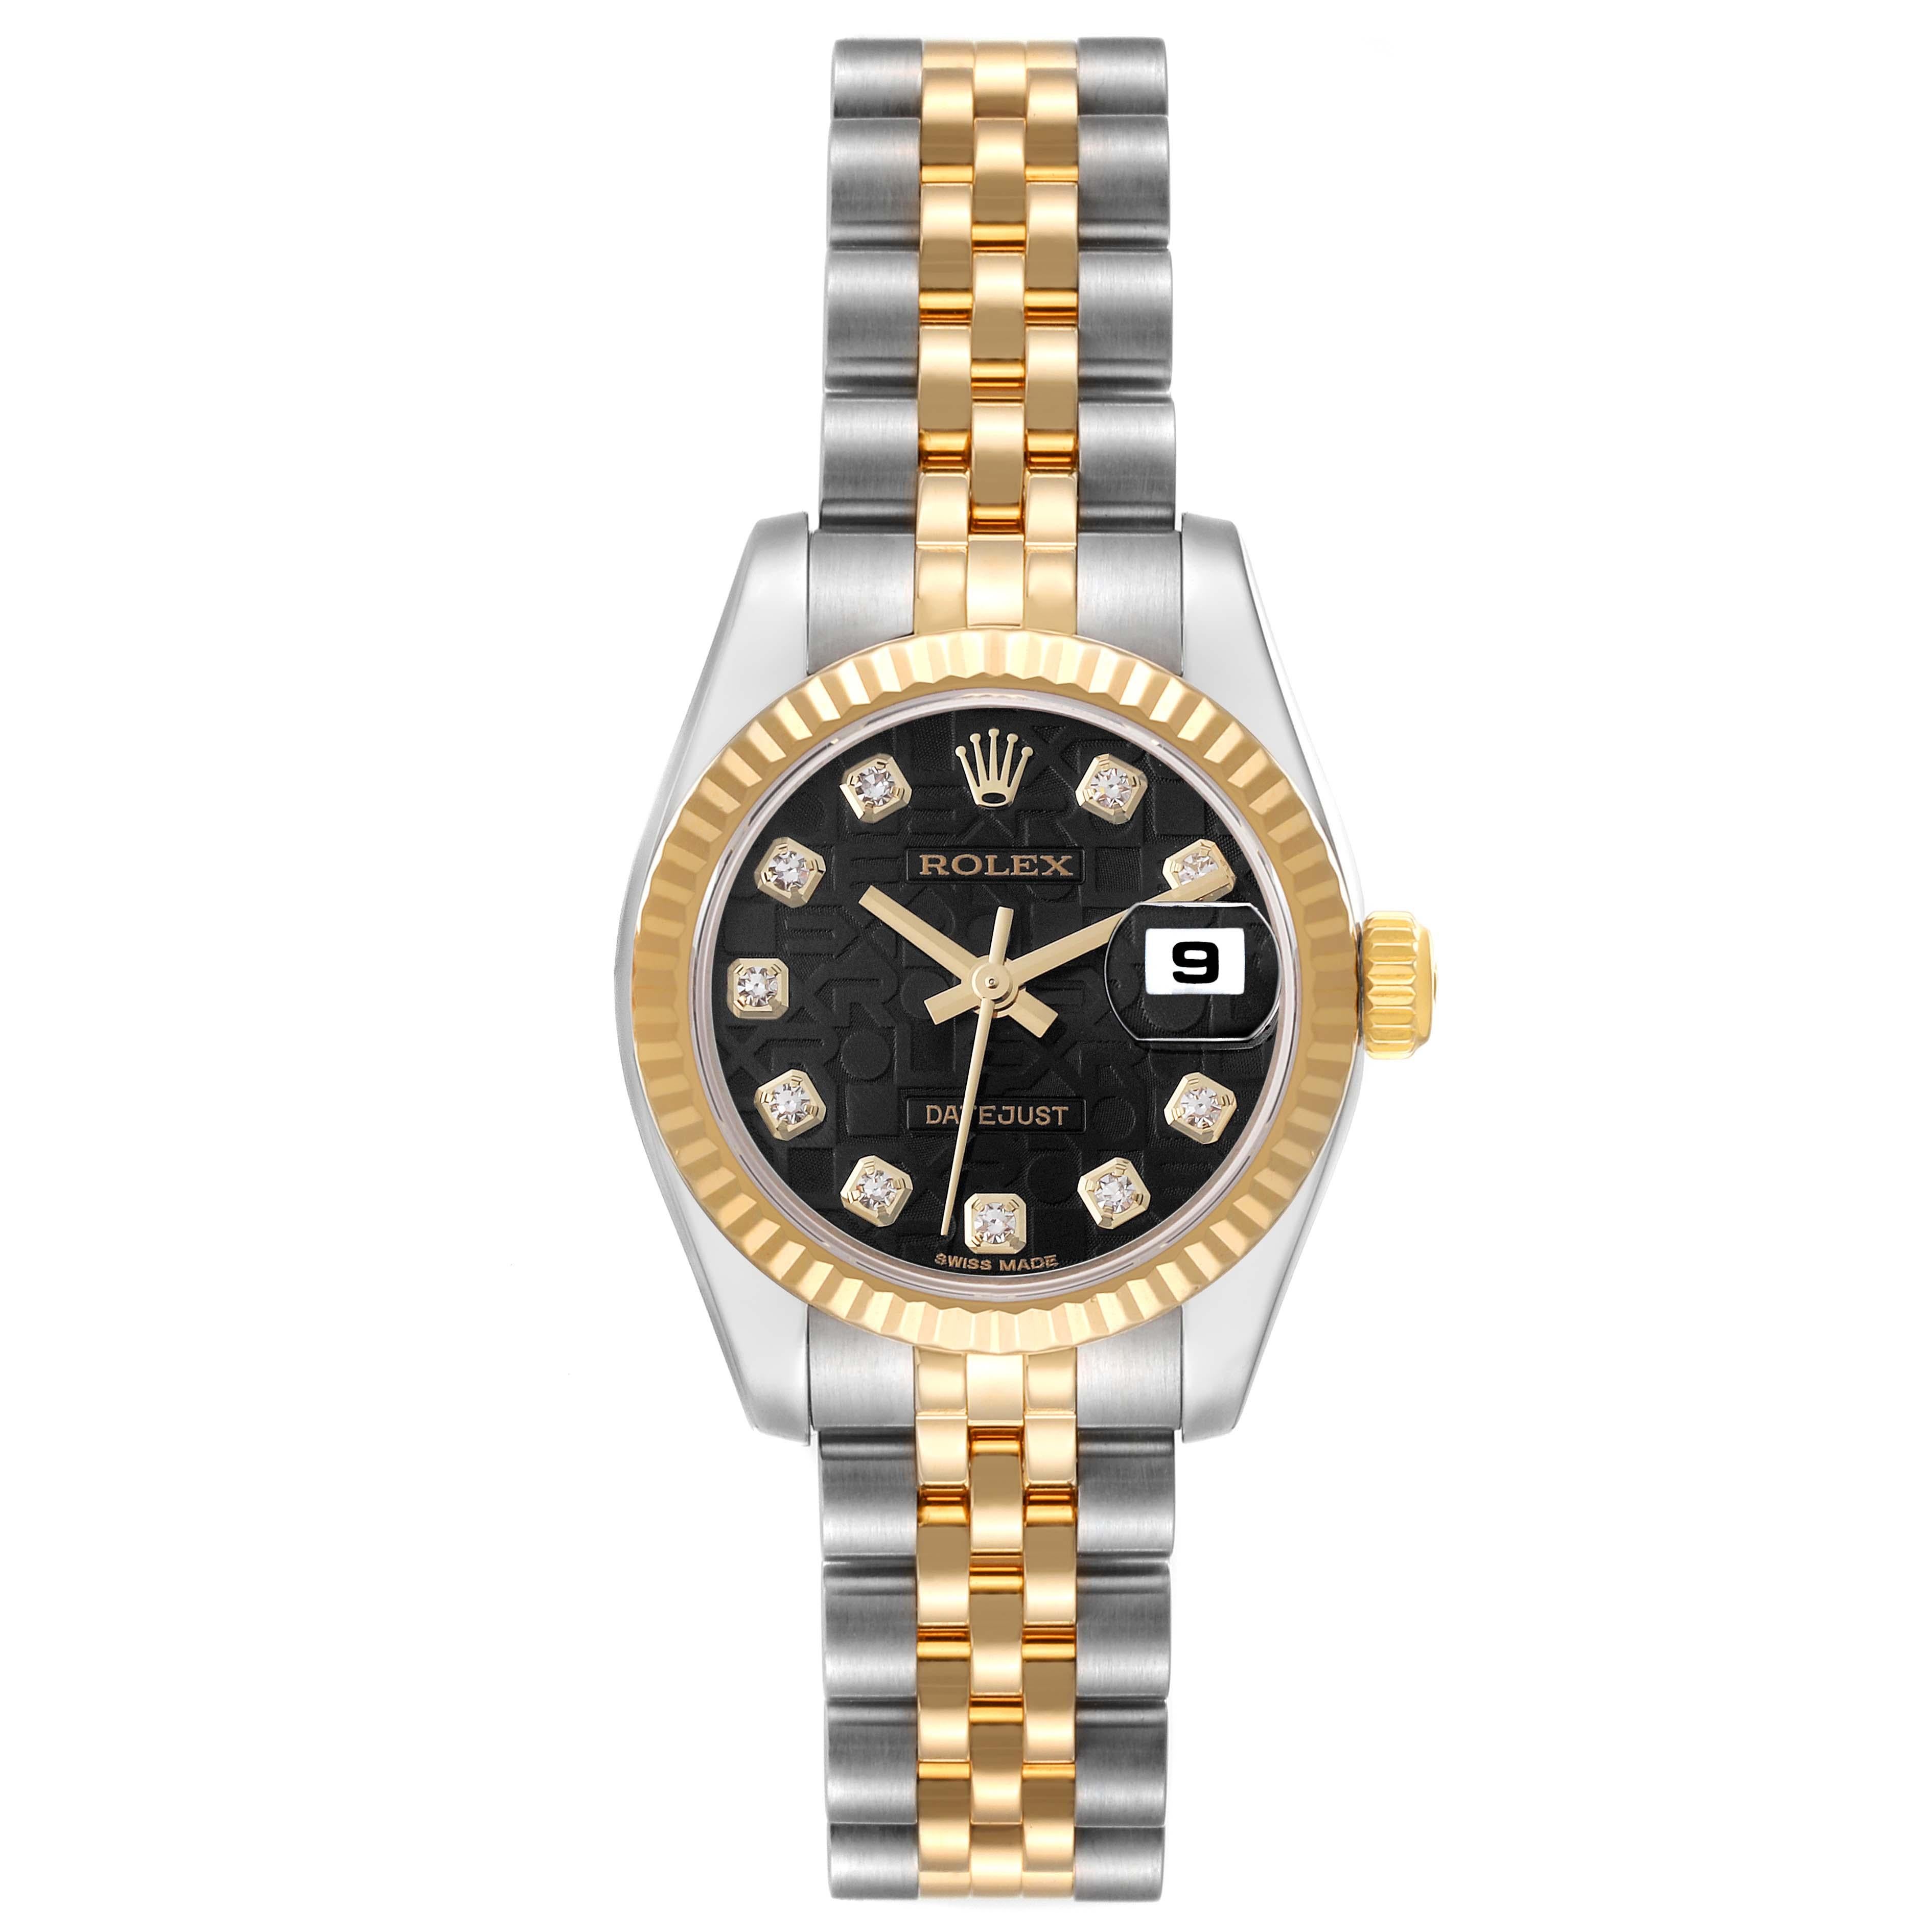 Rolex Datejust Diamond Dial Steel Yellow Gold Ladies Watch 179173 Box Card For Sale 1